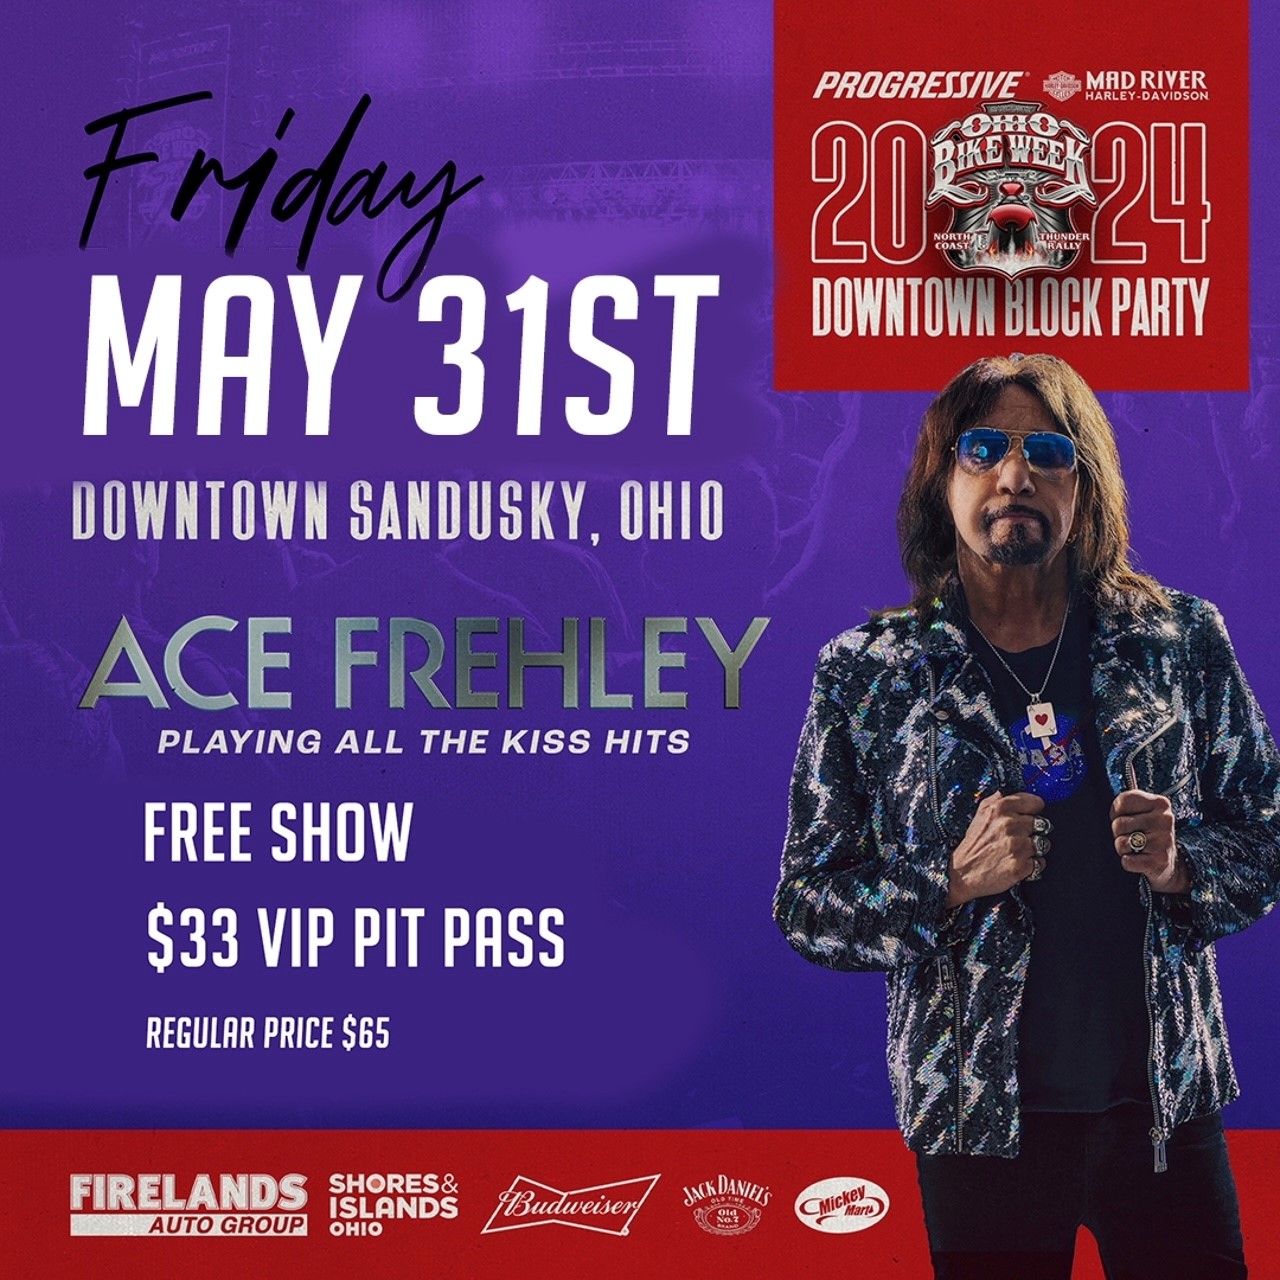 Get a VIP Pass for Ace Frehley for only $33!